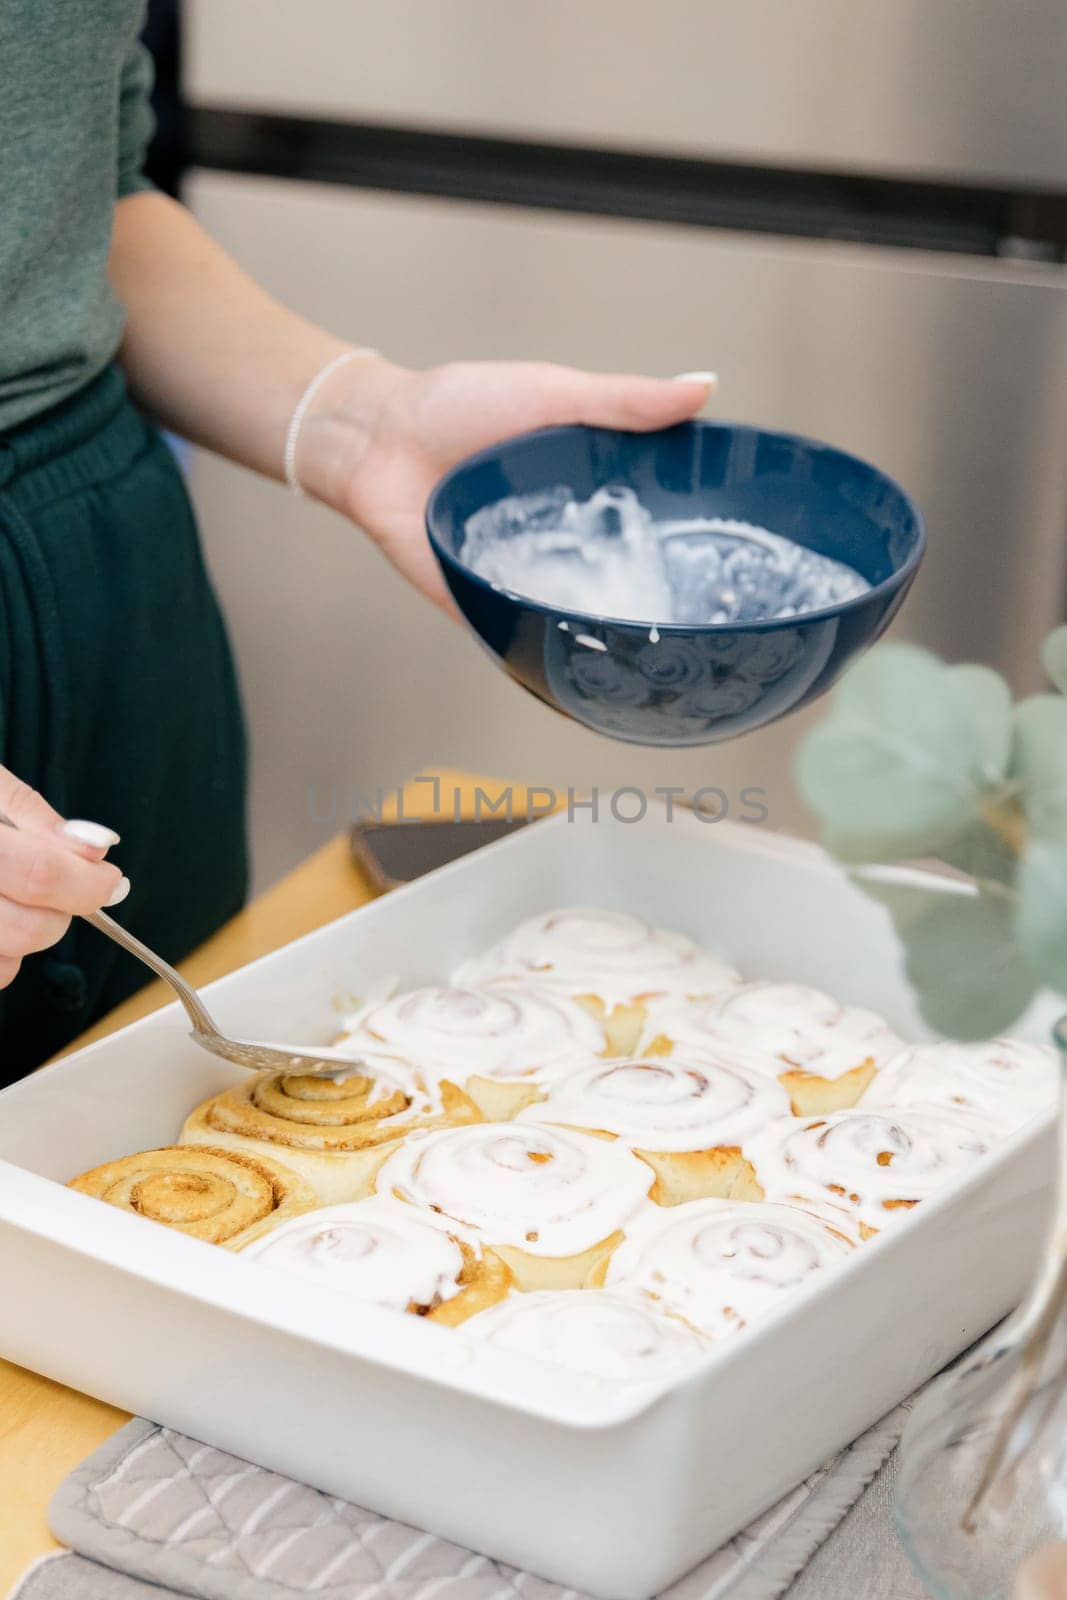 A young girl spreads cream on the Cinnabons in a baking dish on the table. by Nataliya